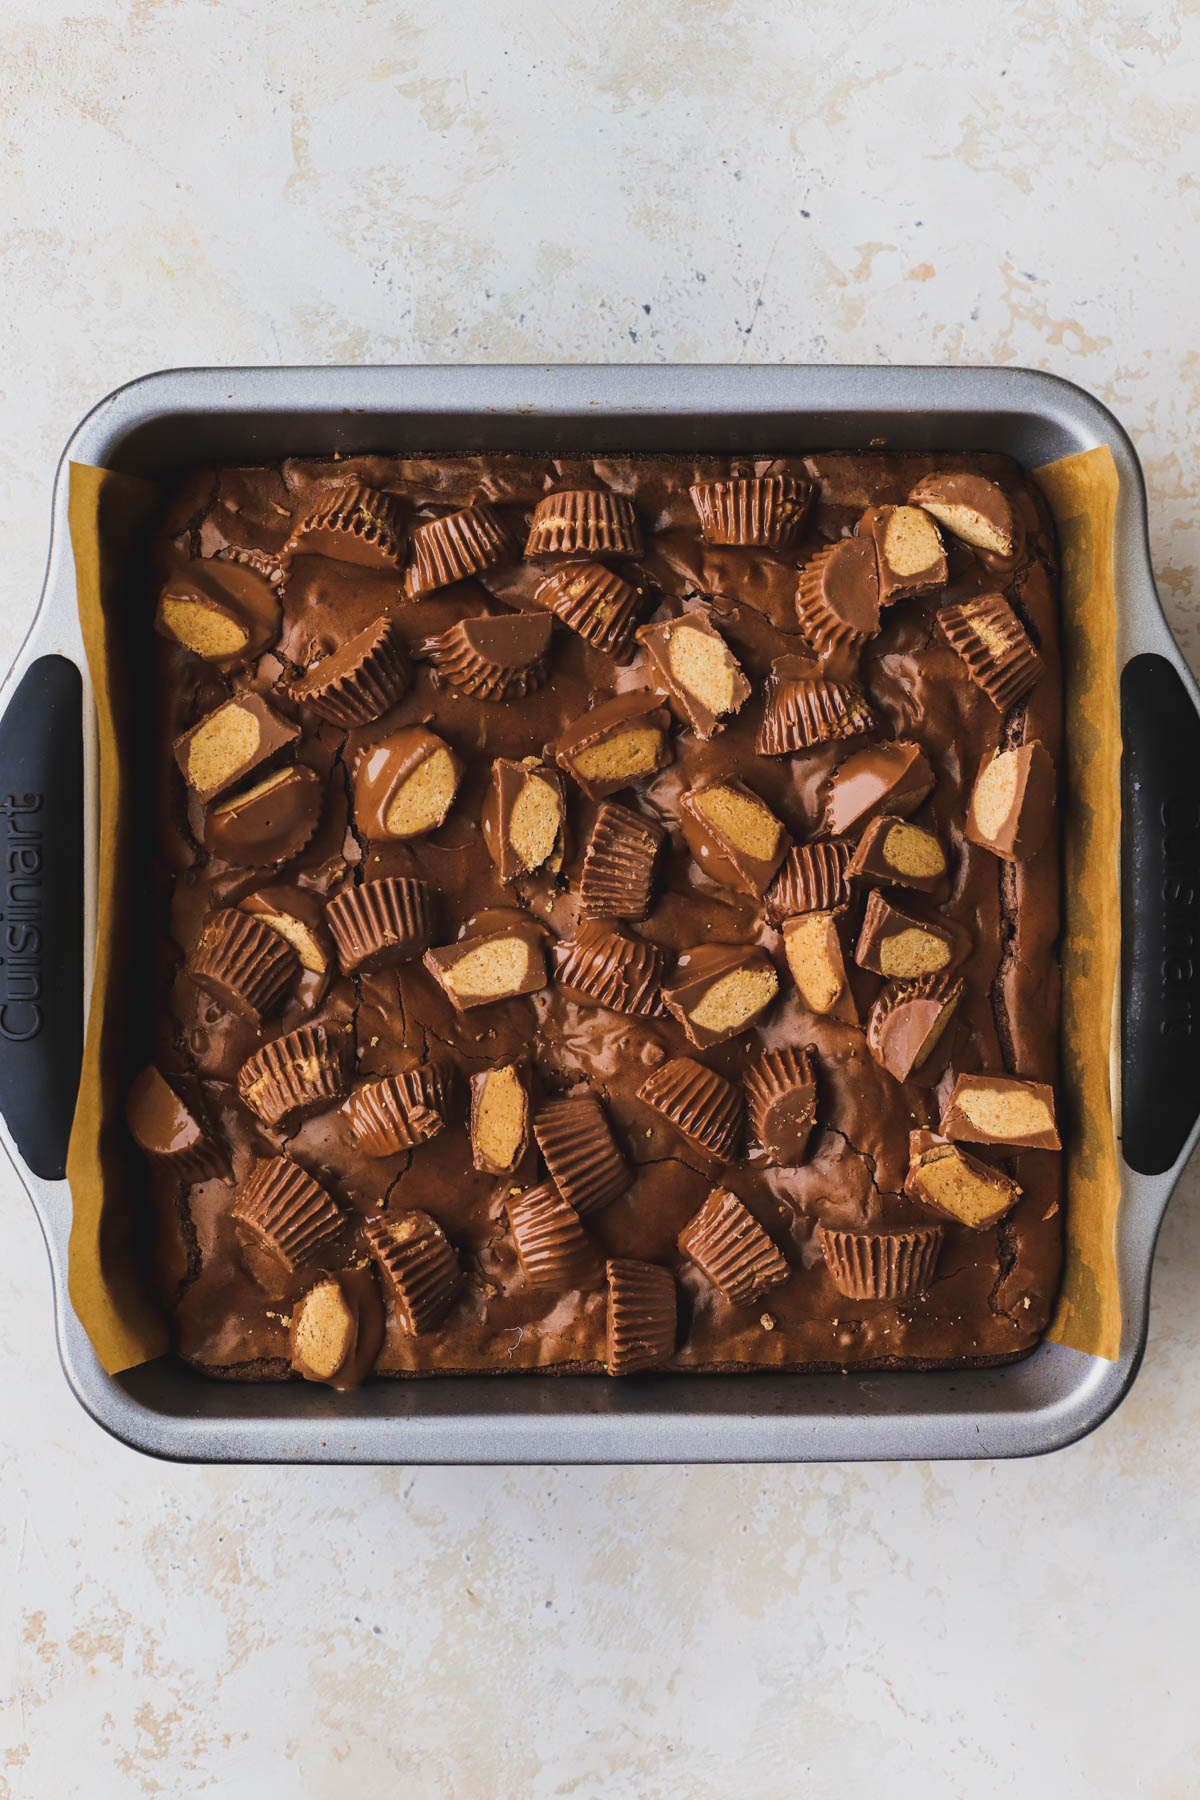 Baked peanut butter cup brownies, topped with additional peanut butter cups.  